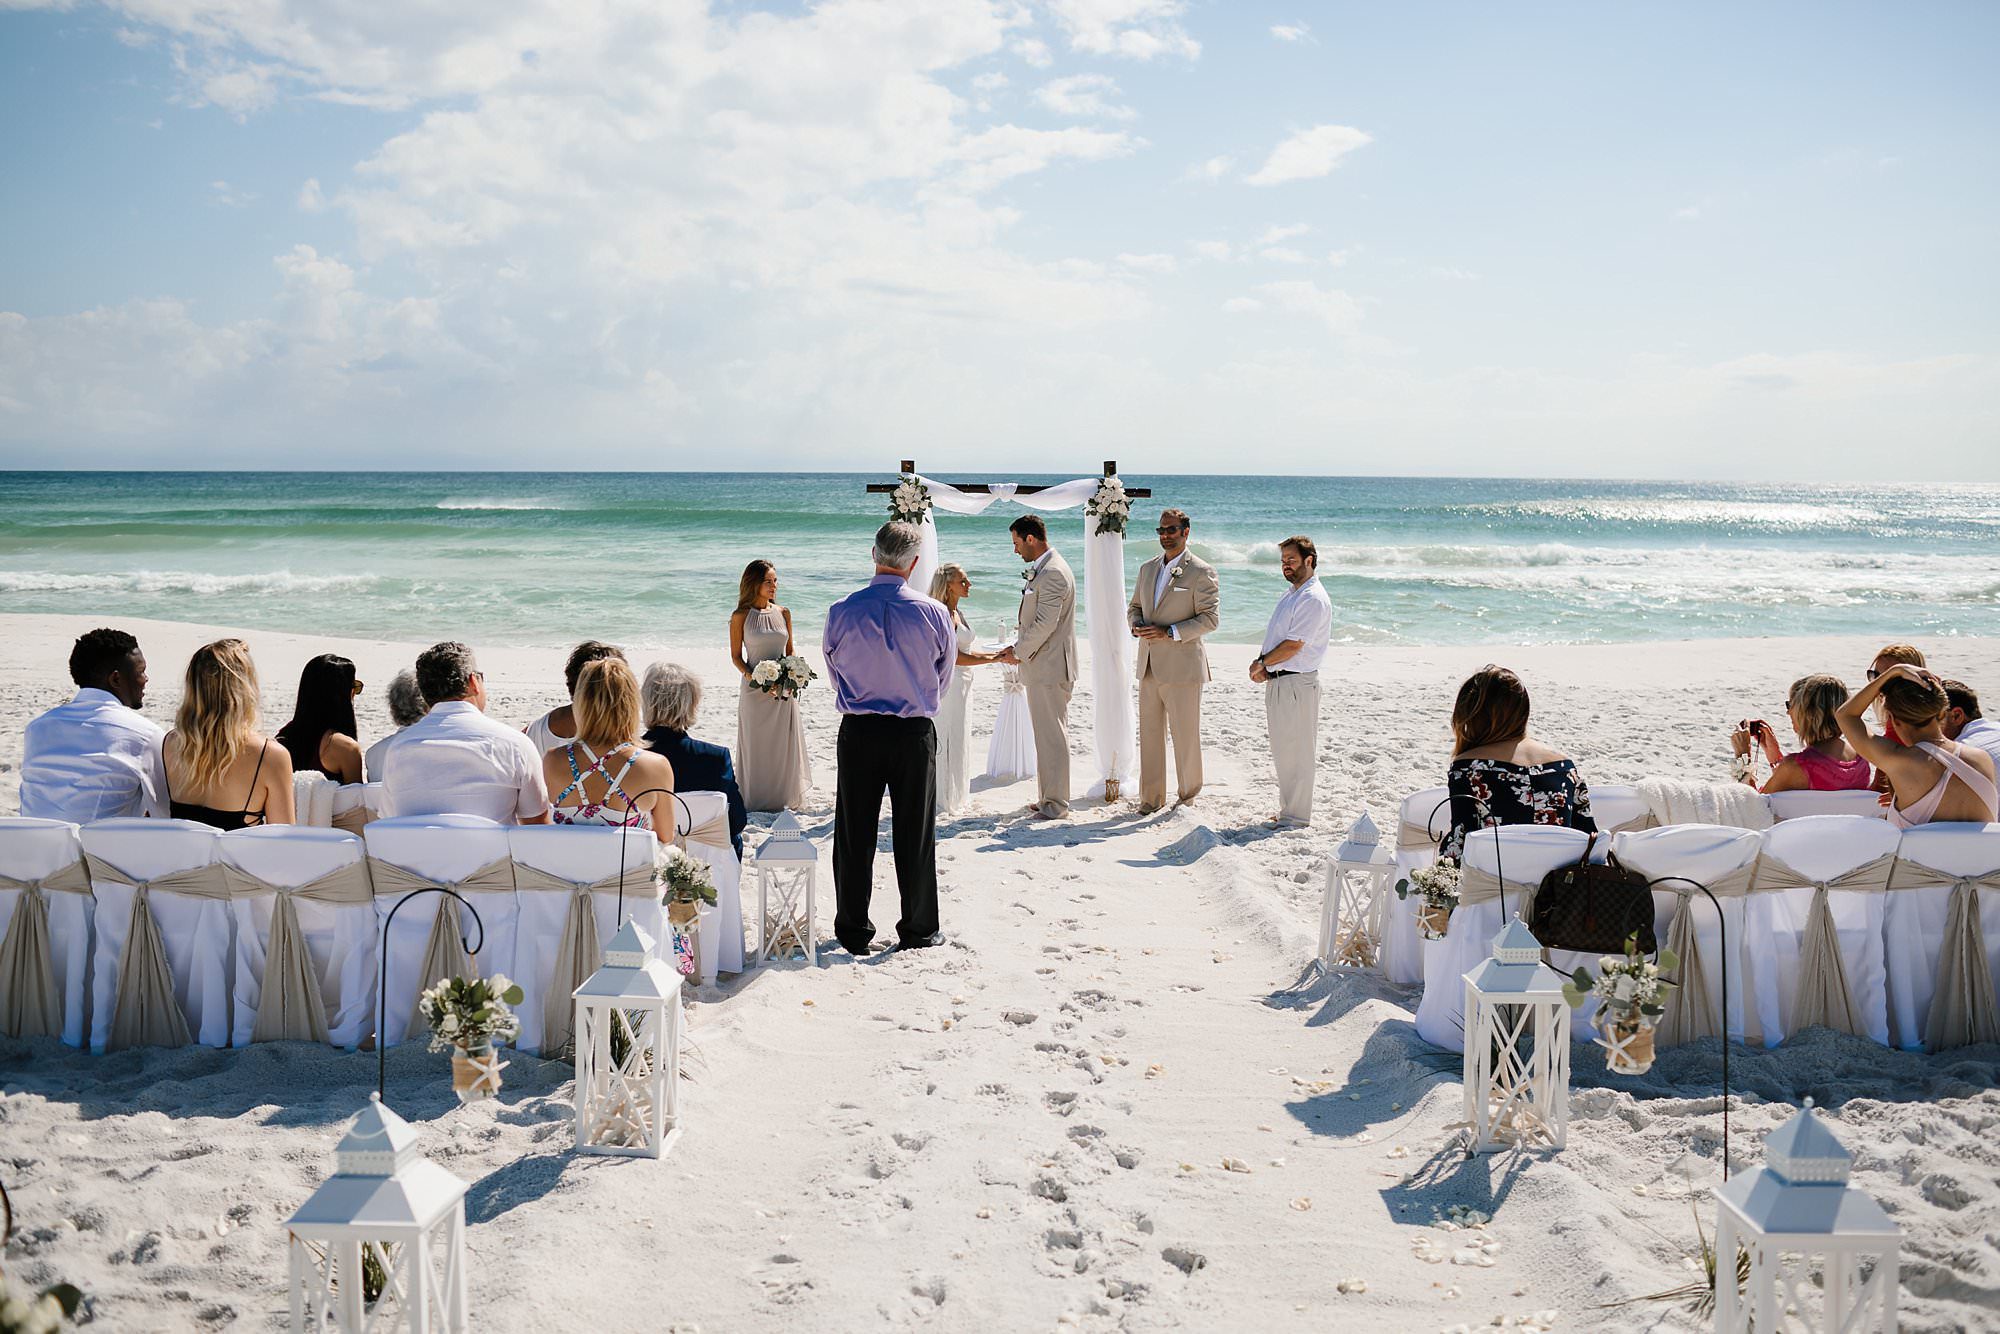 View of intimate wedding ceremony in front of Gulf of Mexico